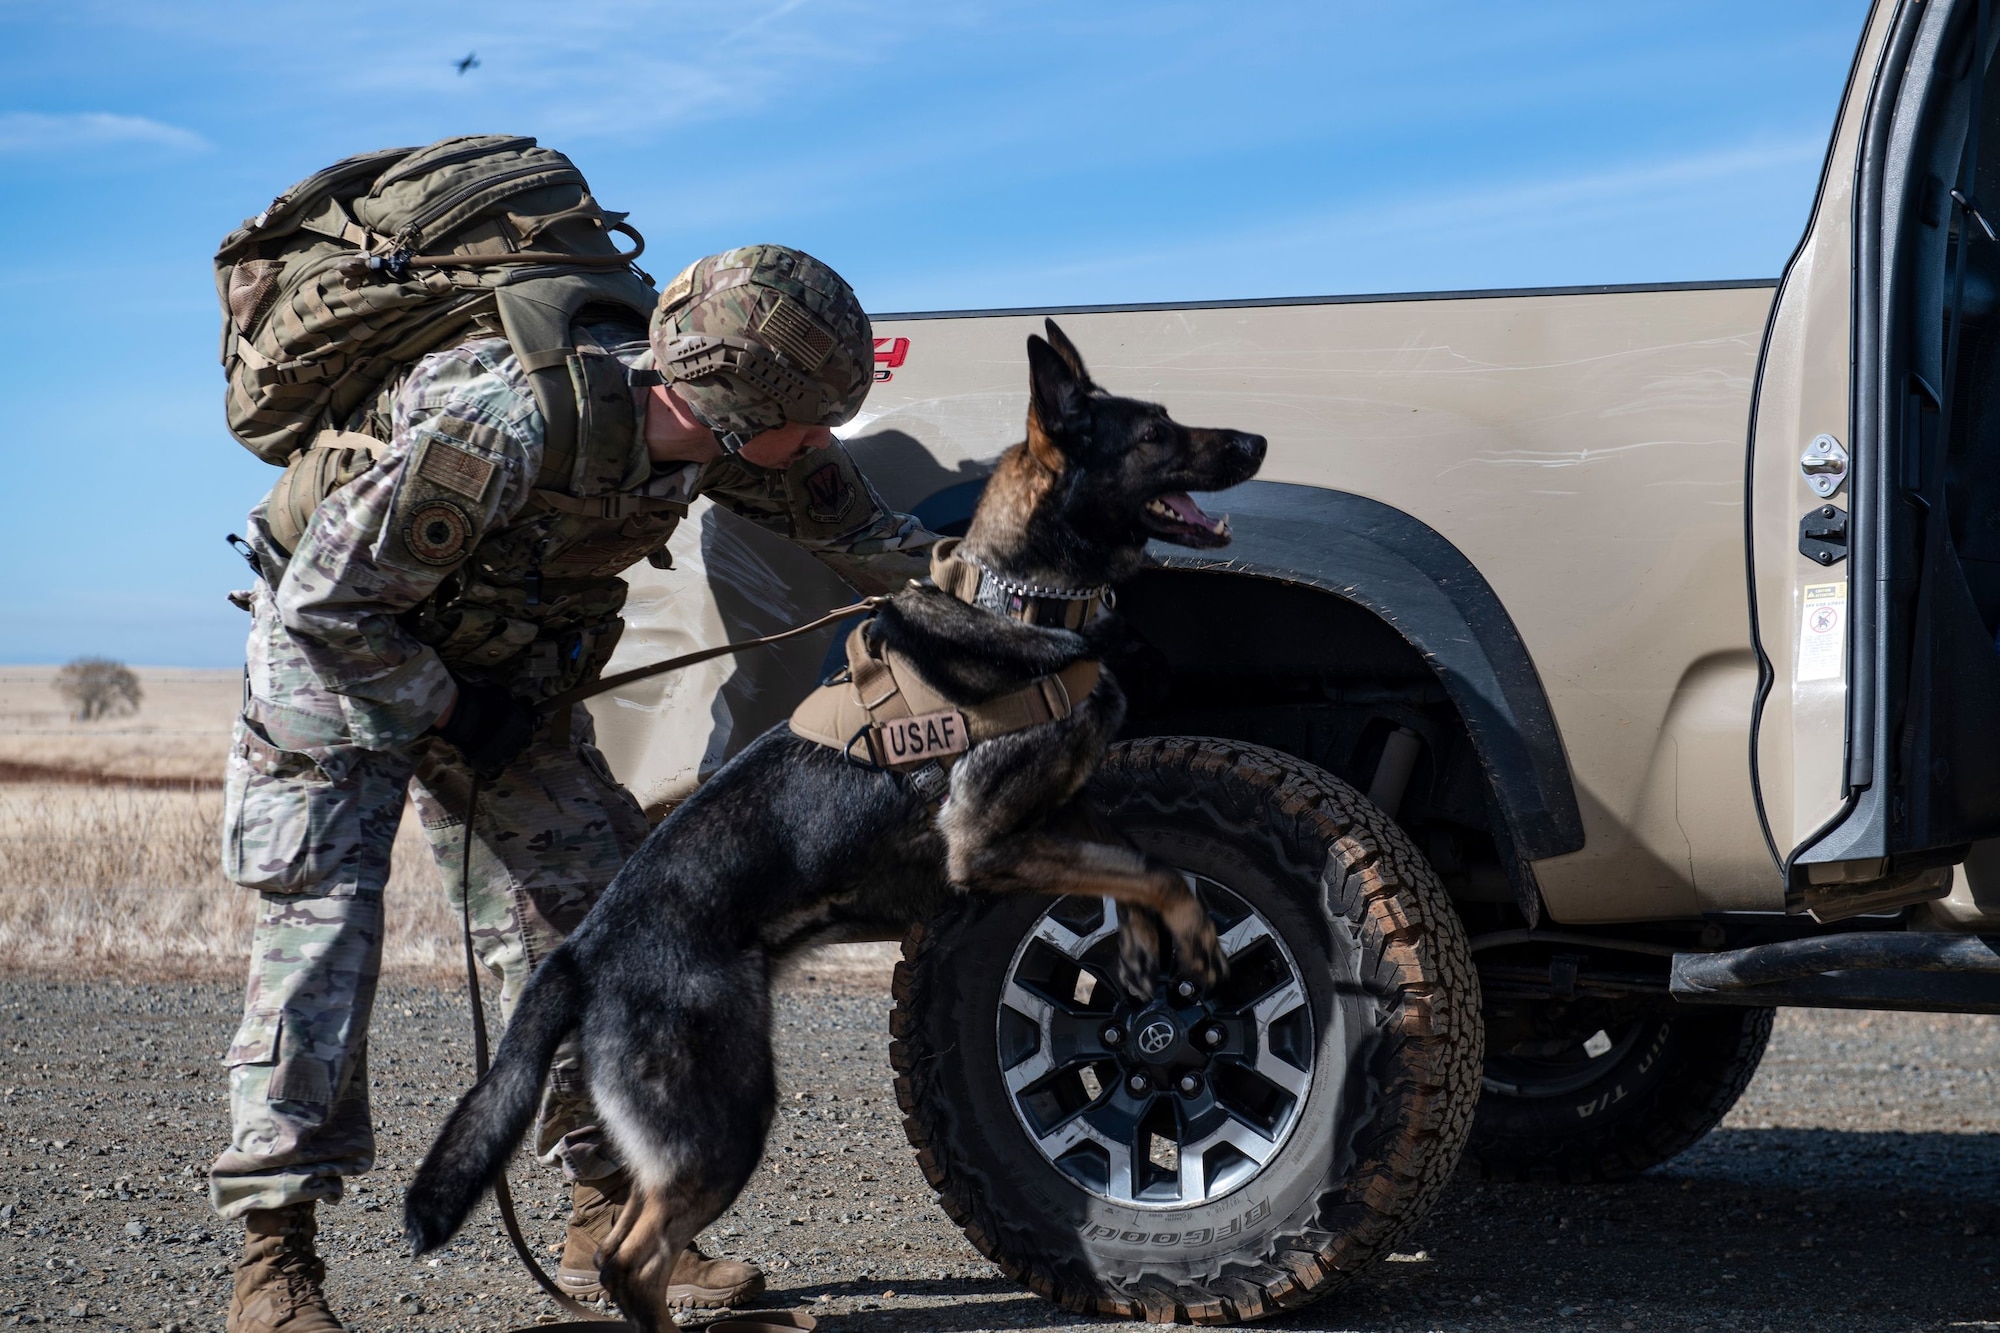 Staff Sgt. David Baumgartner, 9th Security Forces Squadron (SFS) K-9 handler, searches a vehicle for explosives with 9th SFS military working dog Elma during military working dog detection training on Beale Air Force Base.